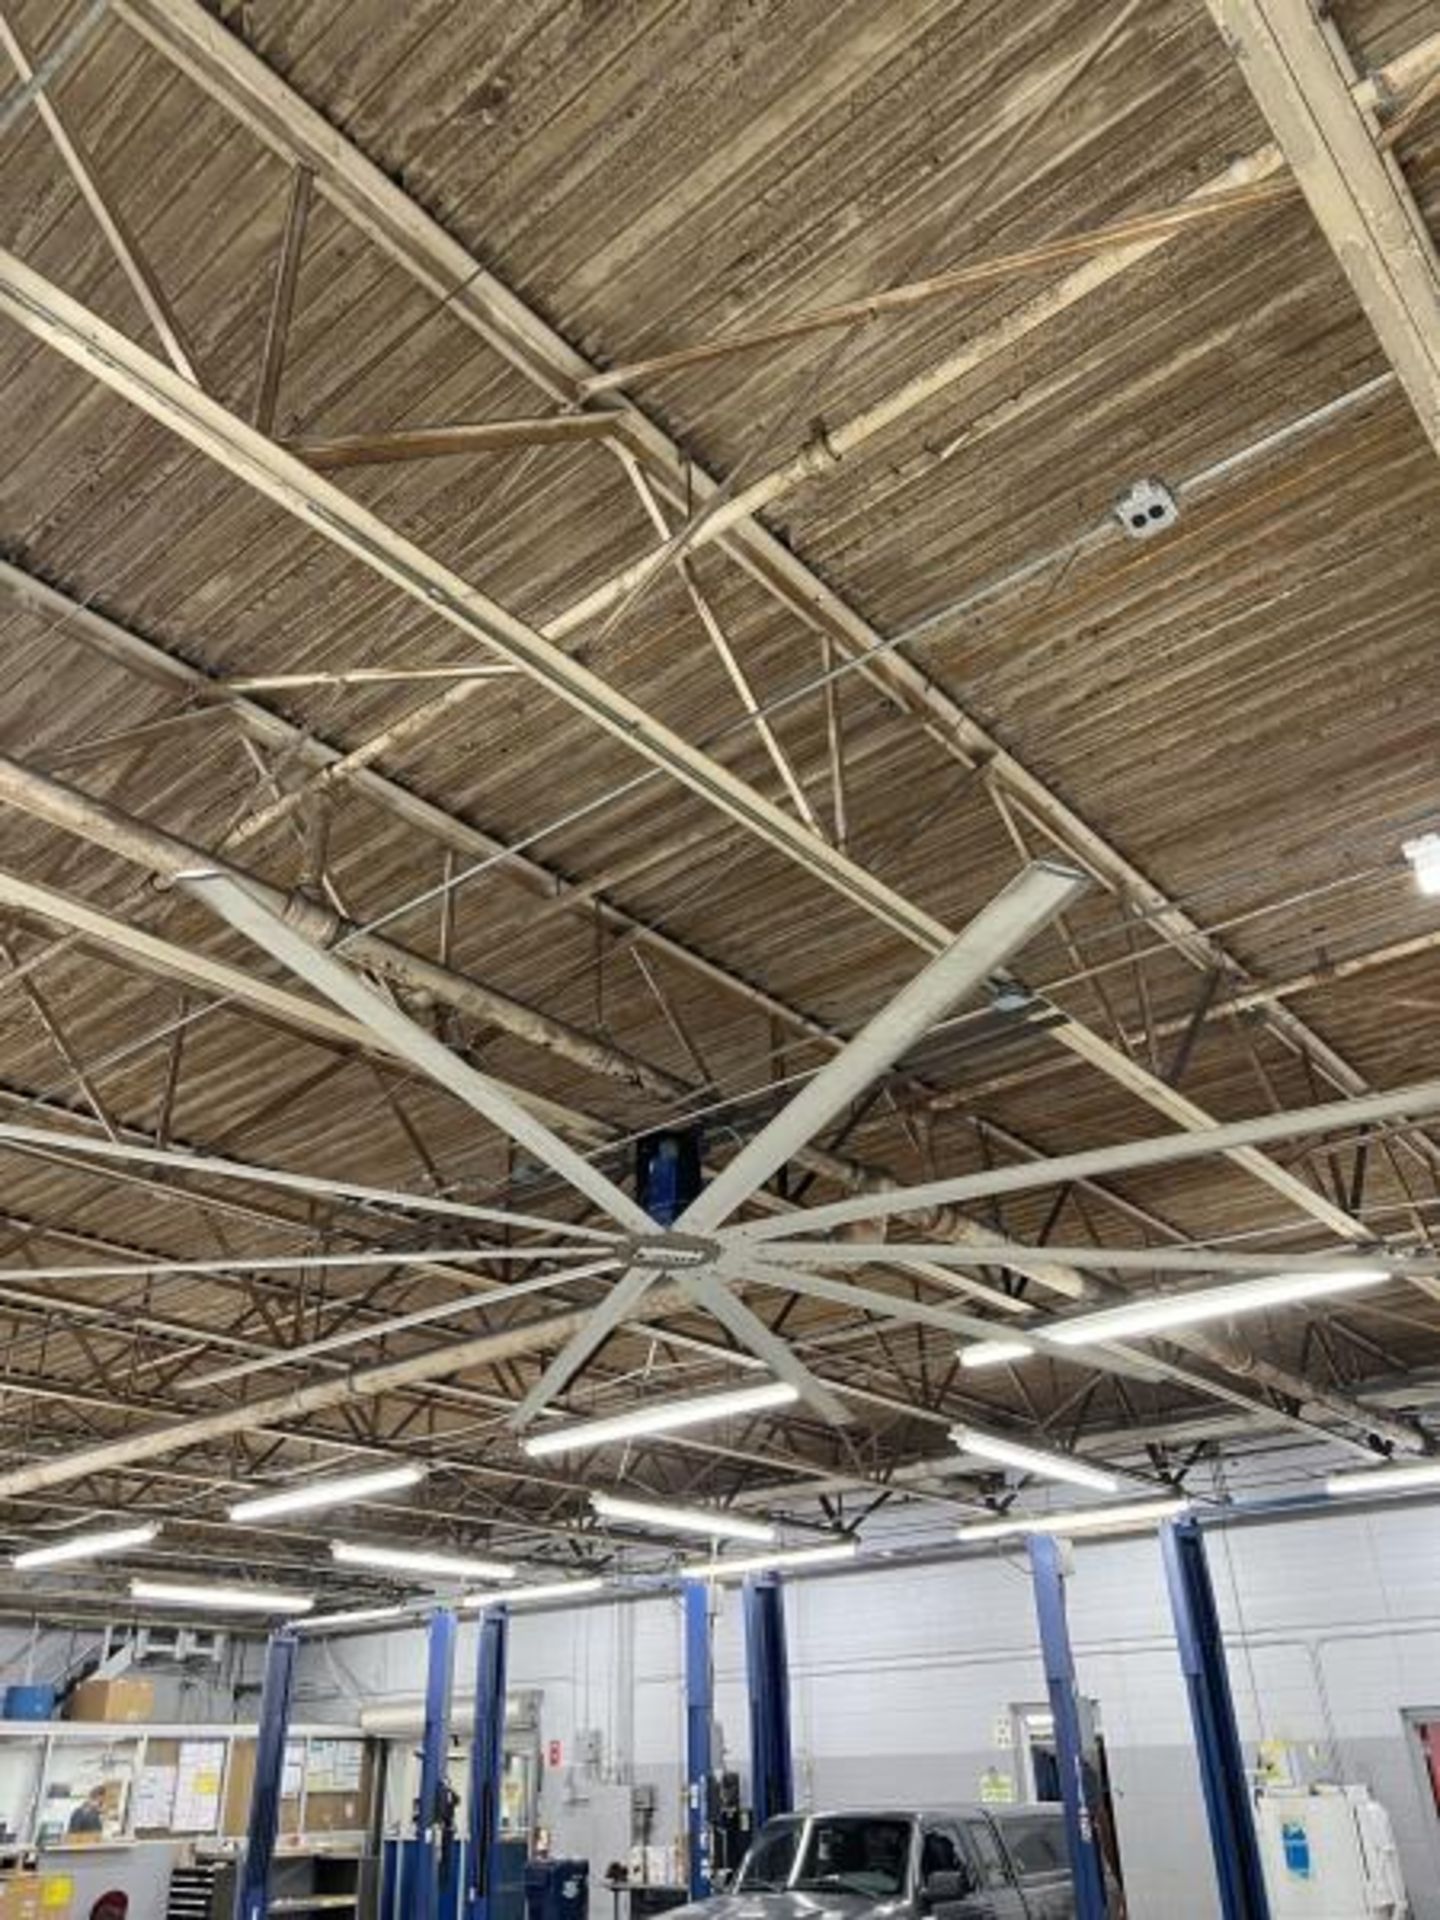 Ceiling Mounted HVLS Large Overhead Shop Fan with (10) Blades; Approx 24' Diameter - Image 4 of 5